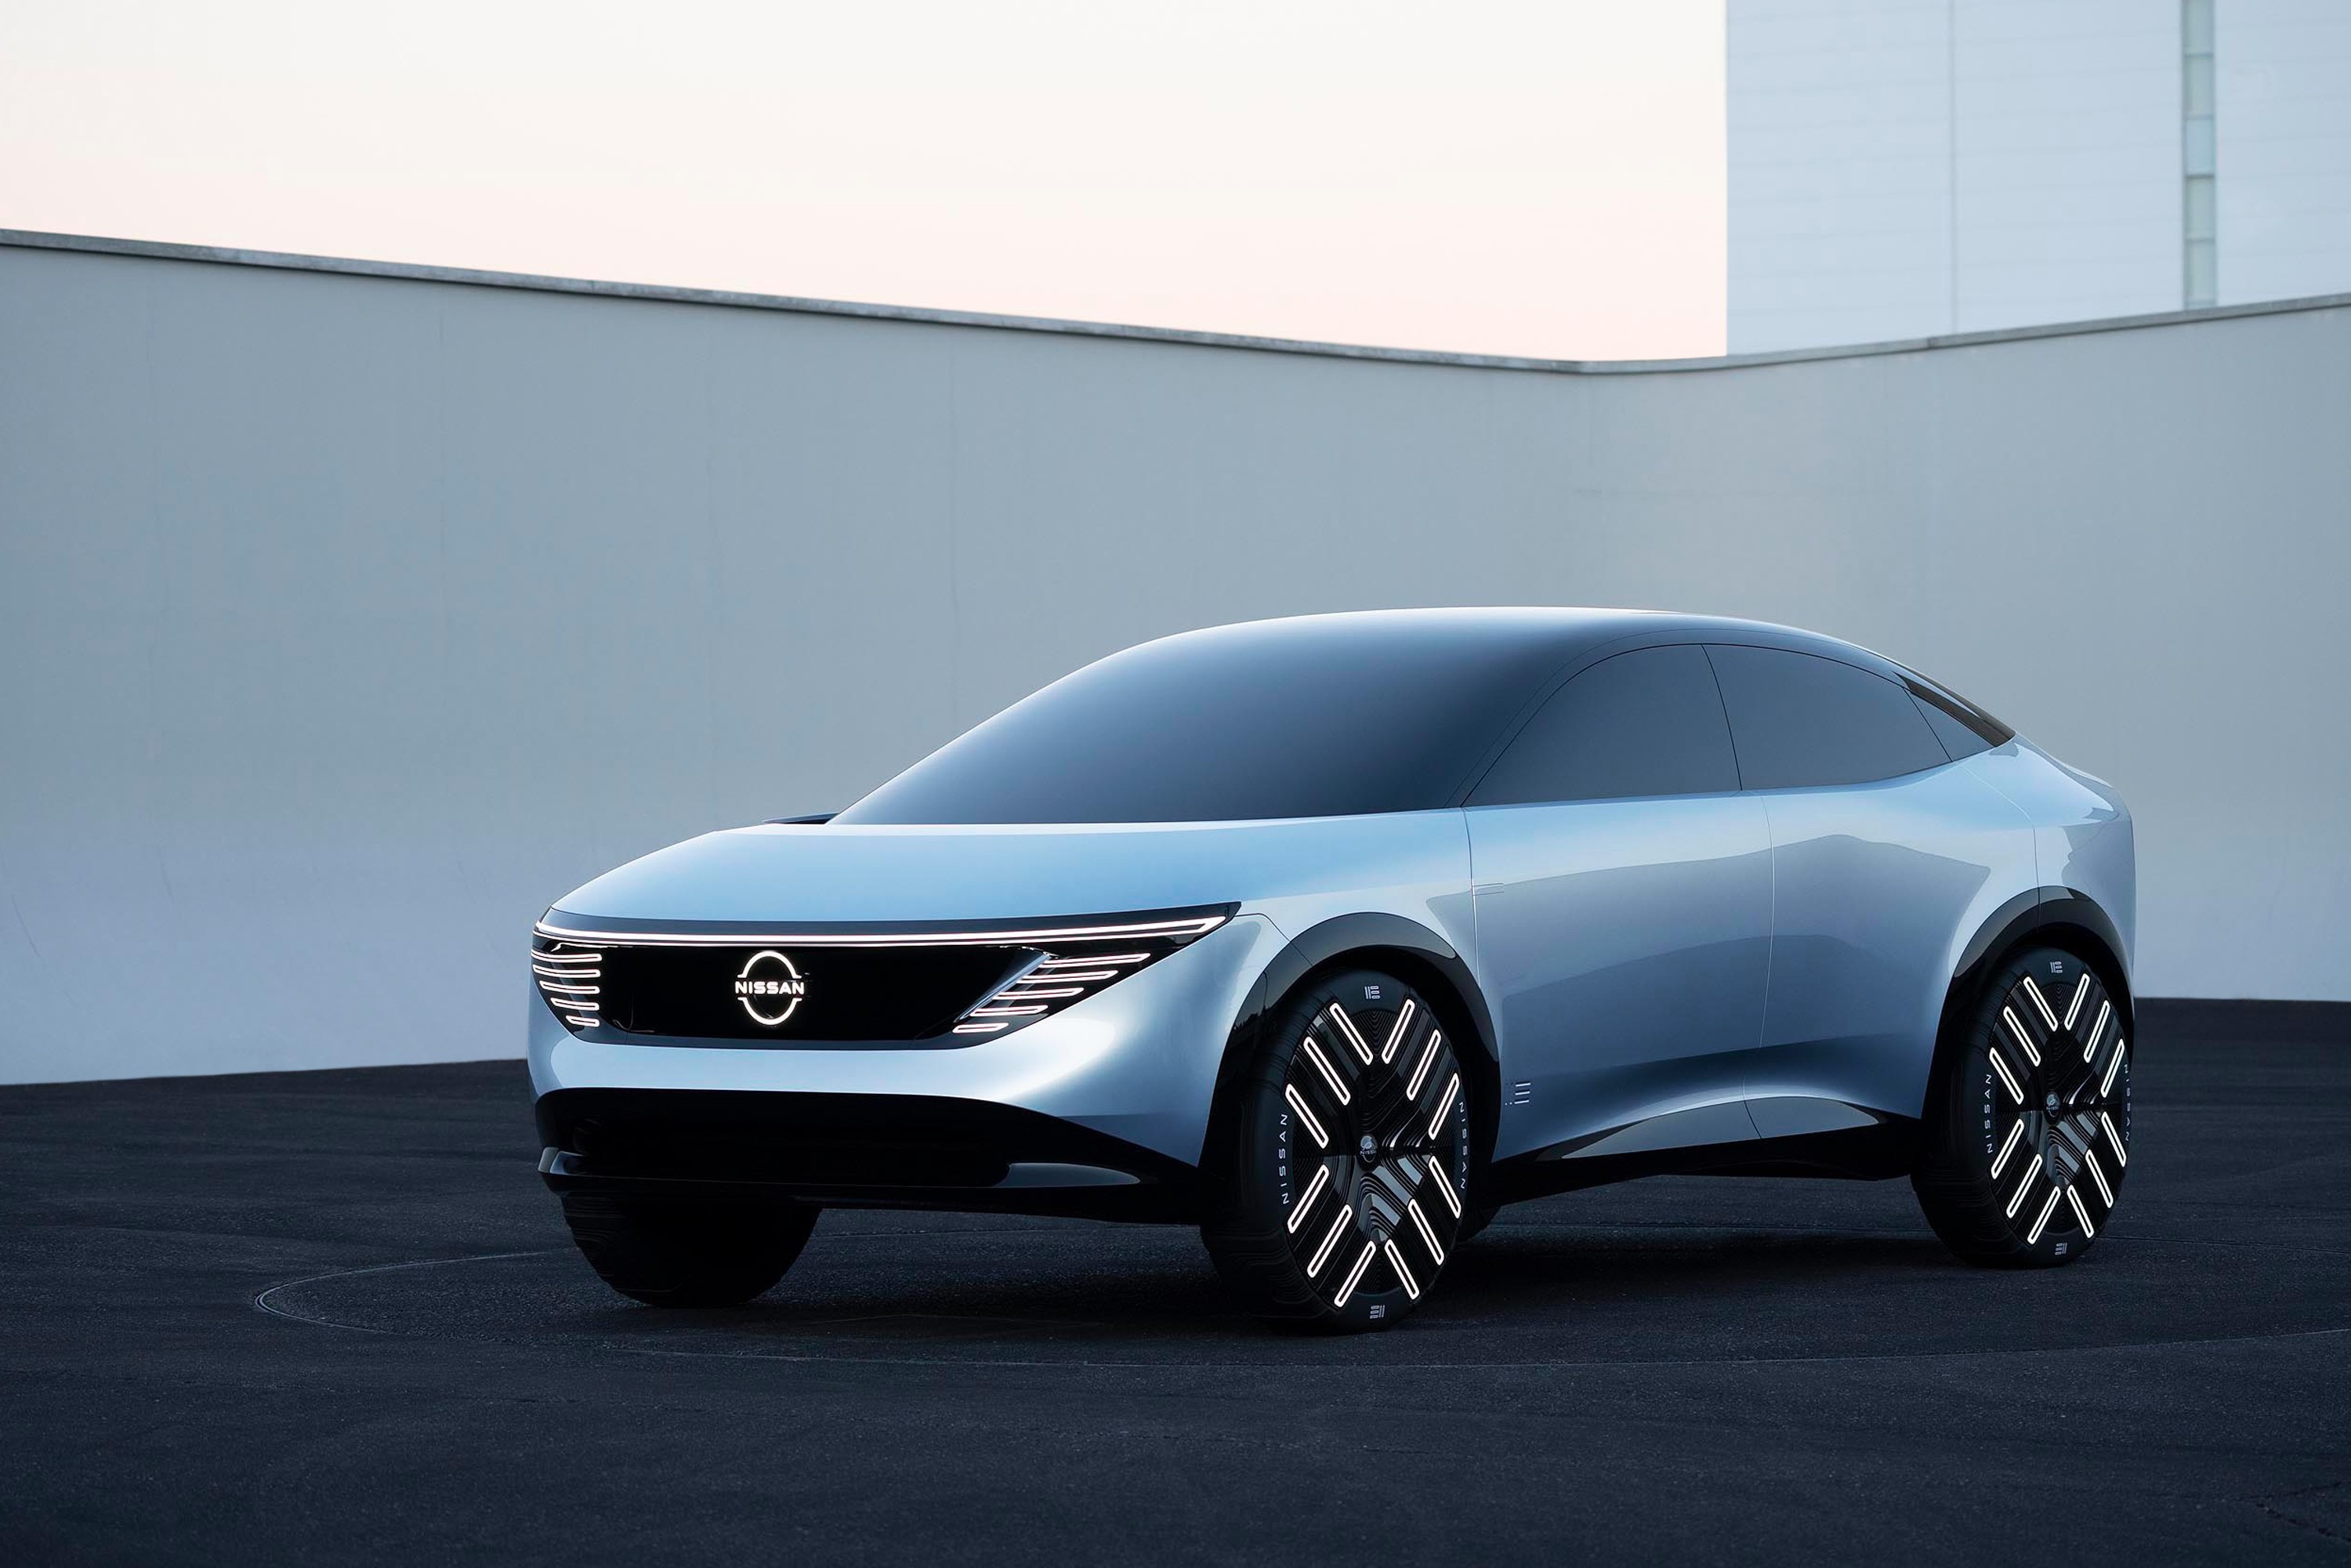 Europe to lead the charge to electrification under Nissan Ambition 2030 vision